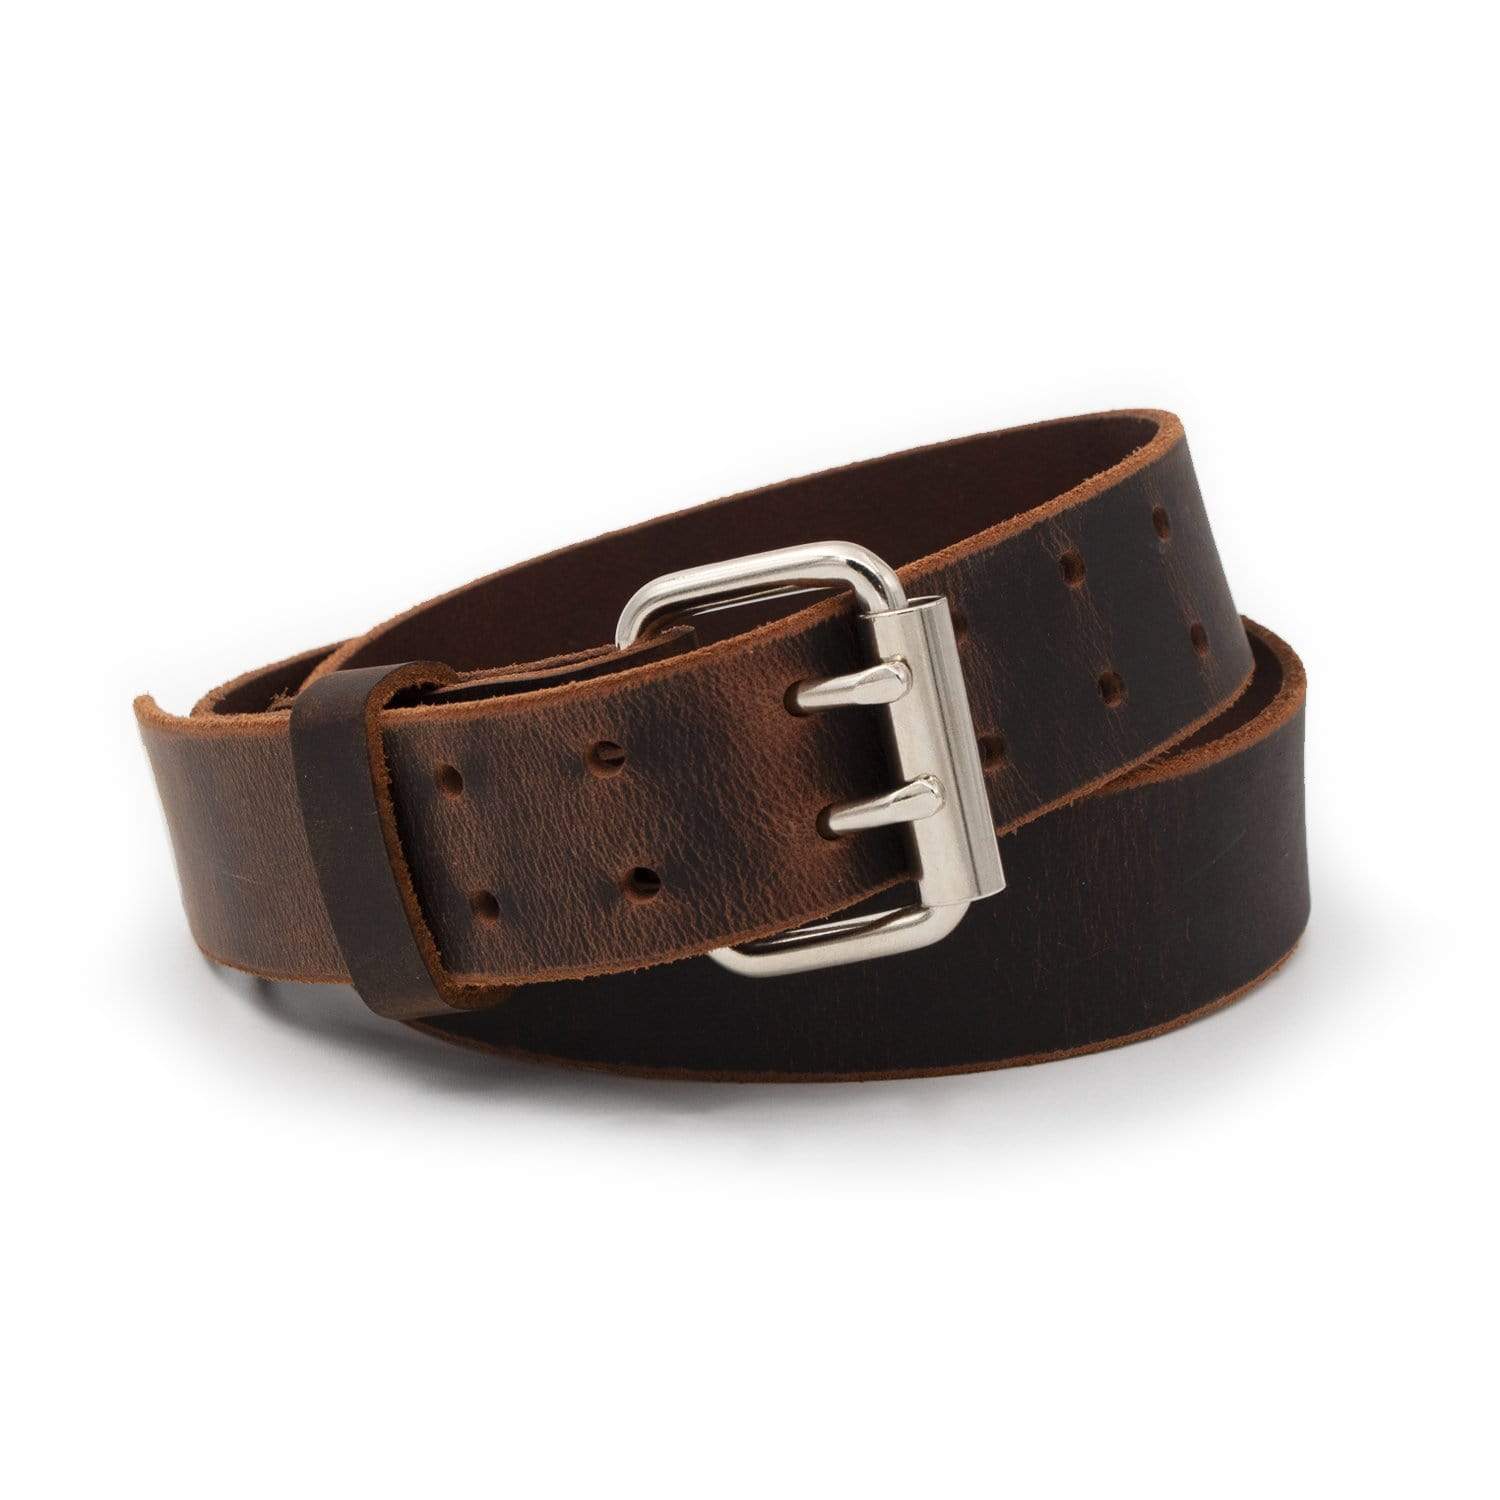 The Double Down Belt Rustic Leather Belt